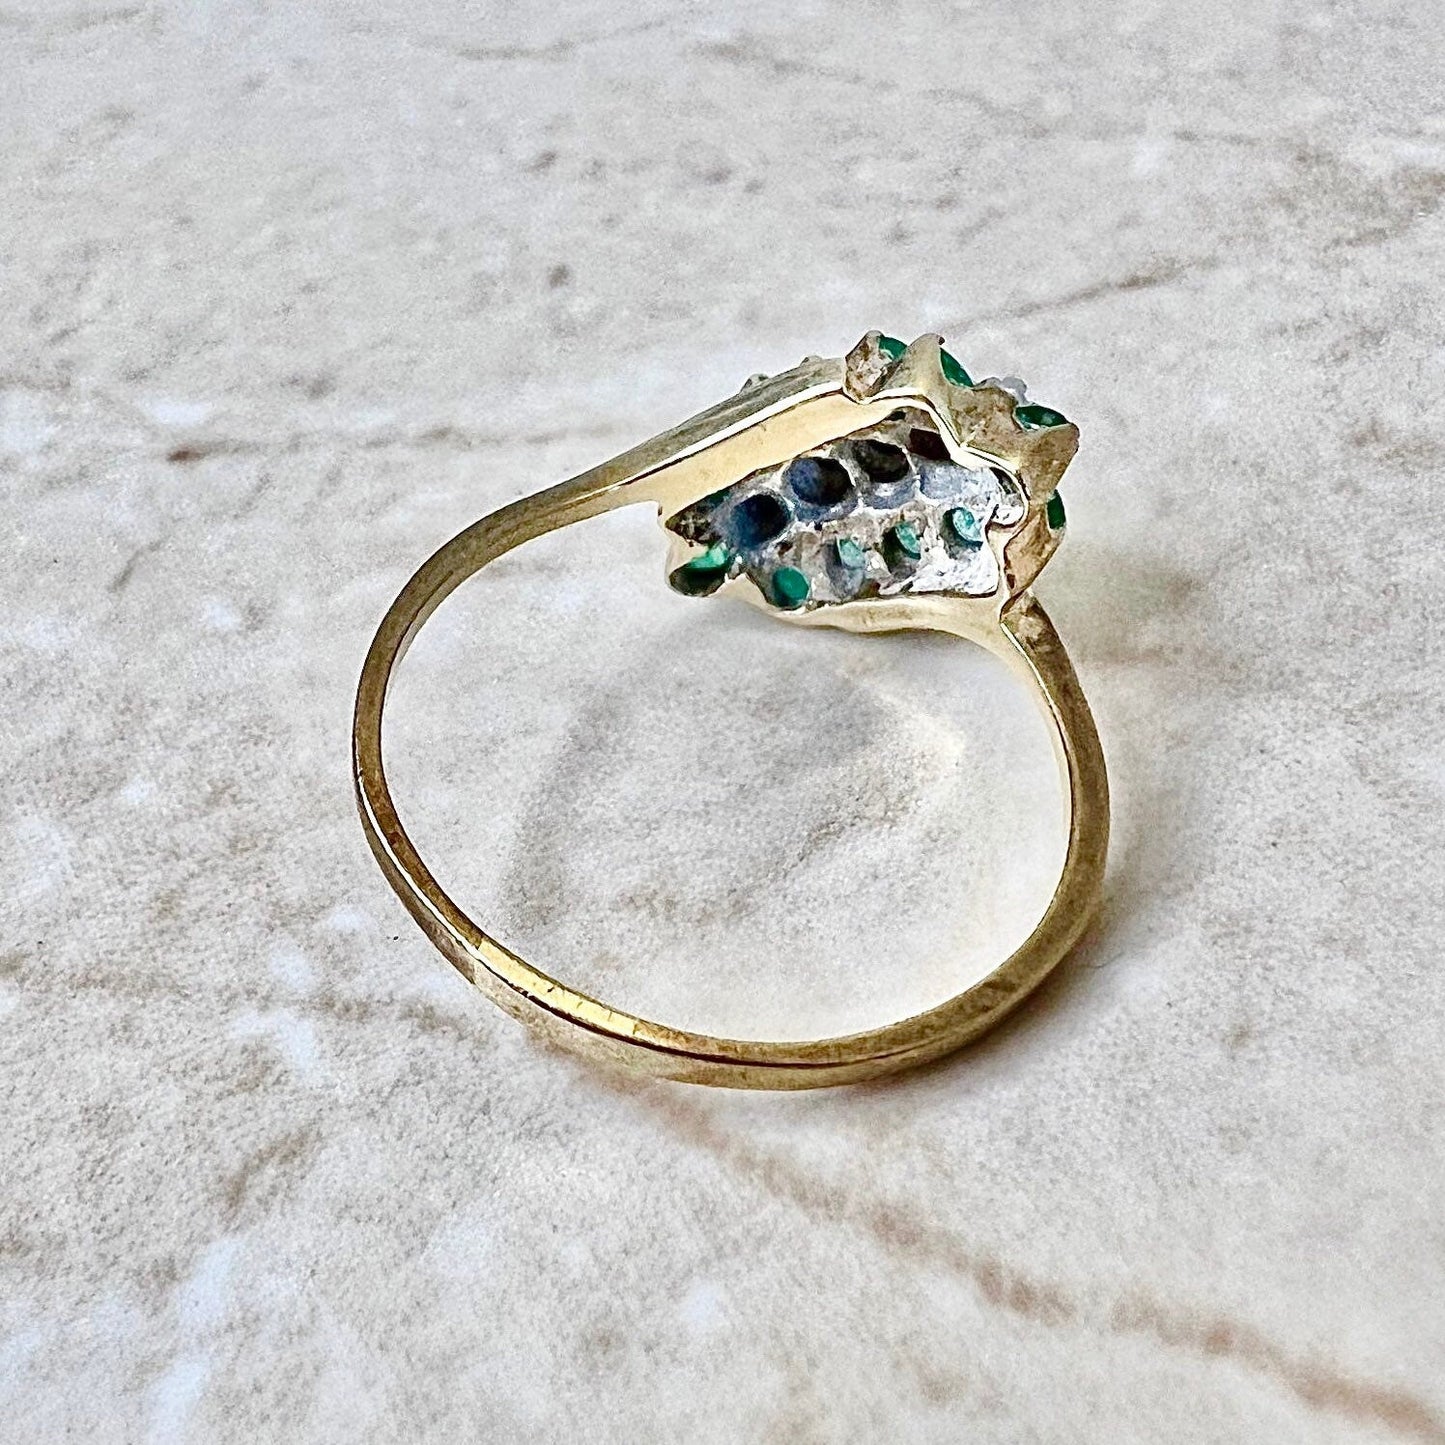 Vintage 10K Natural Emerald & Diamond Ring - 2 Tone Gold Emerald Cocktail Ring - Promise Ring - April May Birthstone - Best Gifts For Her